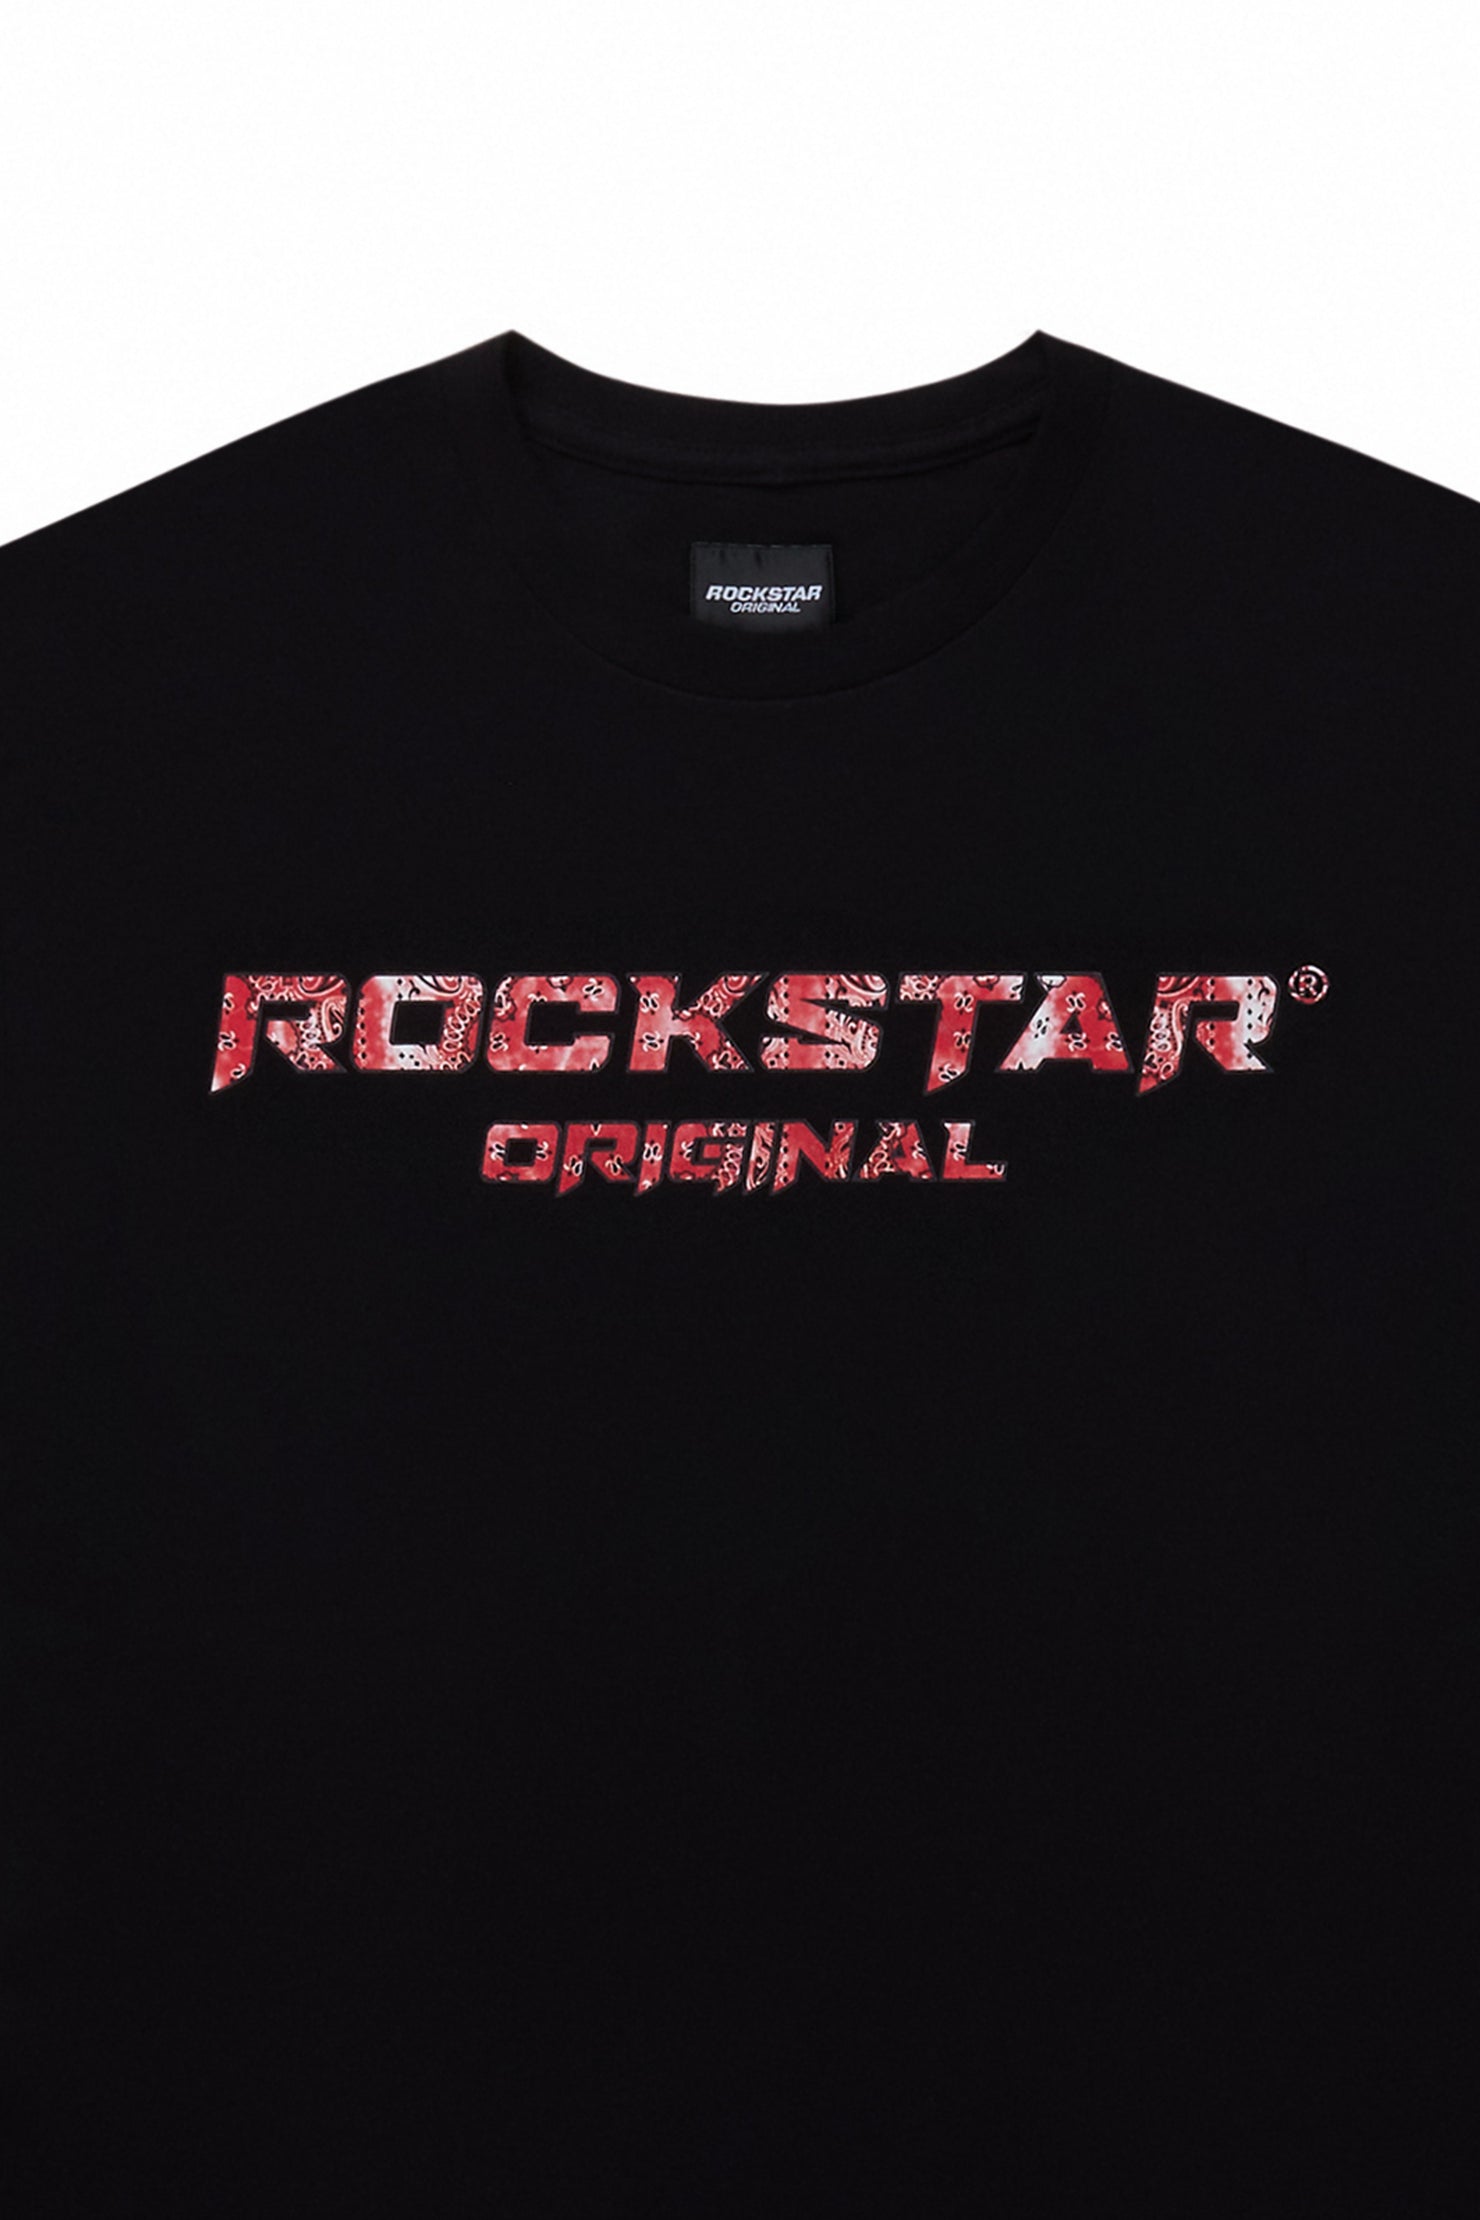 Booker Black/Red Graphic T-Shirt